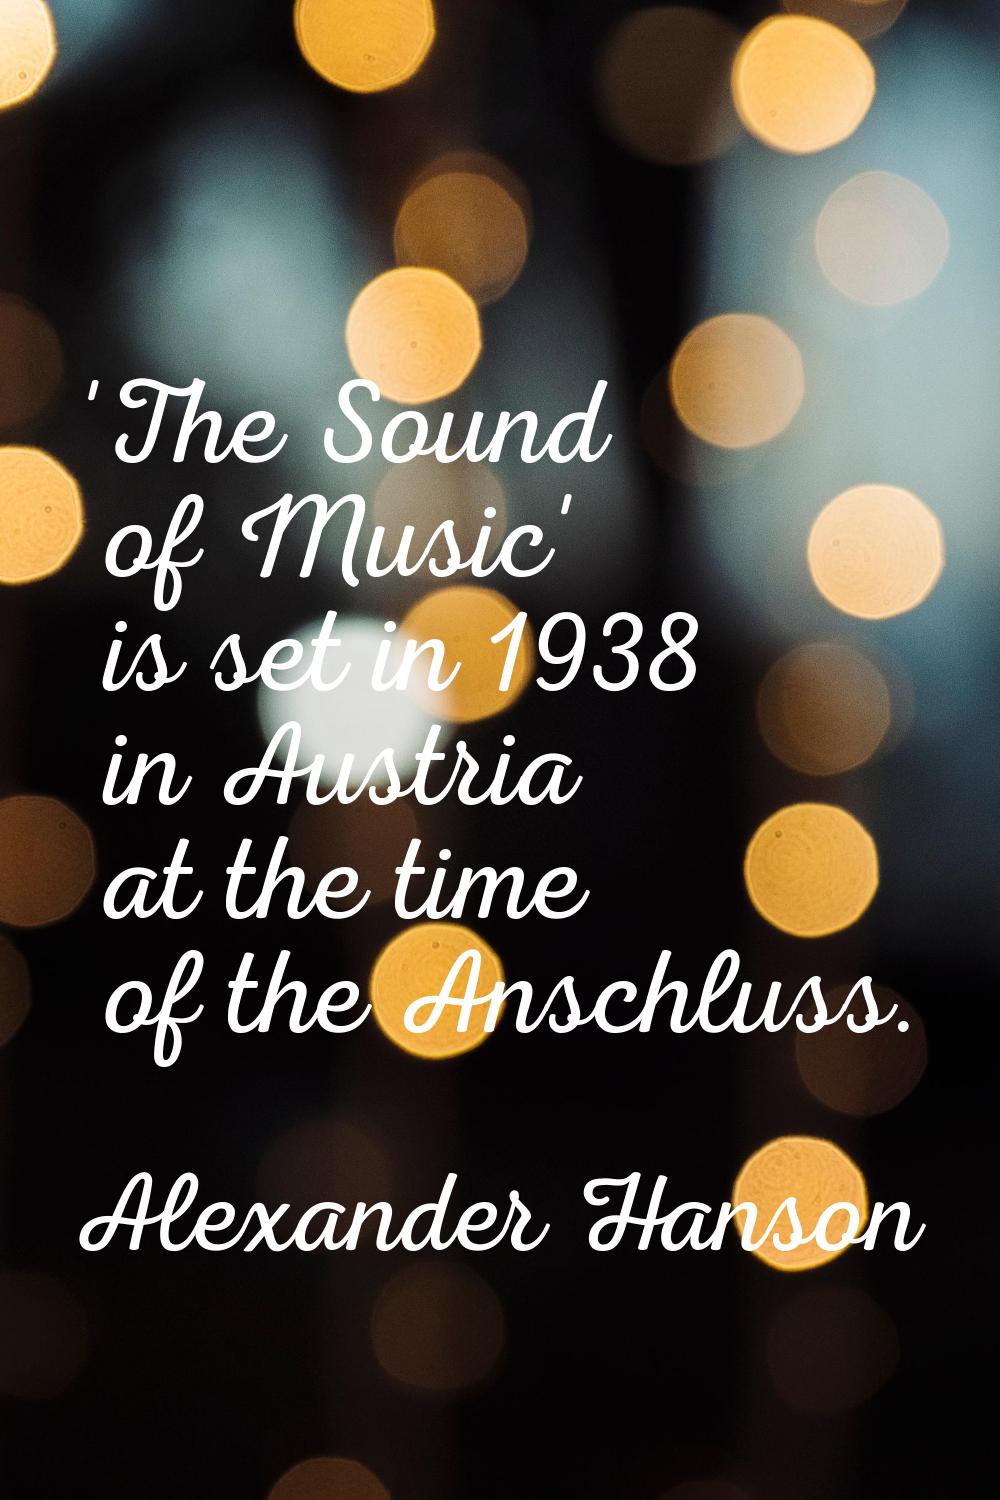 'The Sound of Music' is set in 1938 in Austria at the time of the Anschluss.